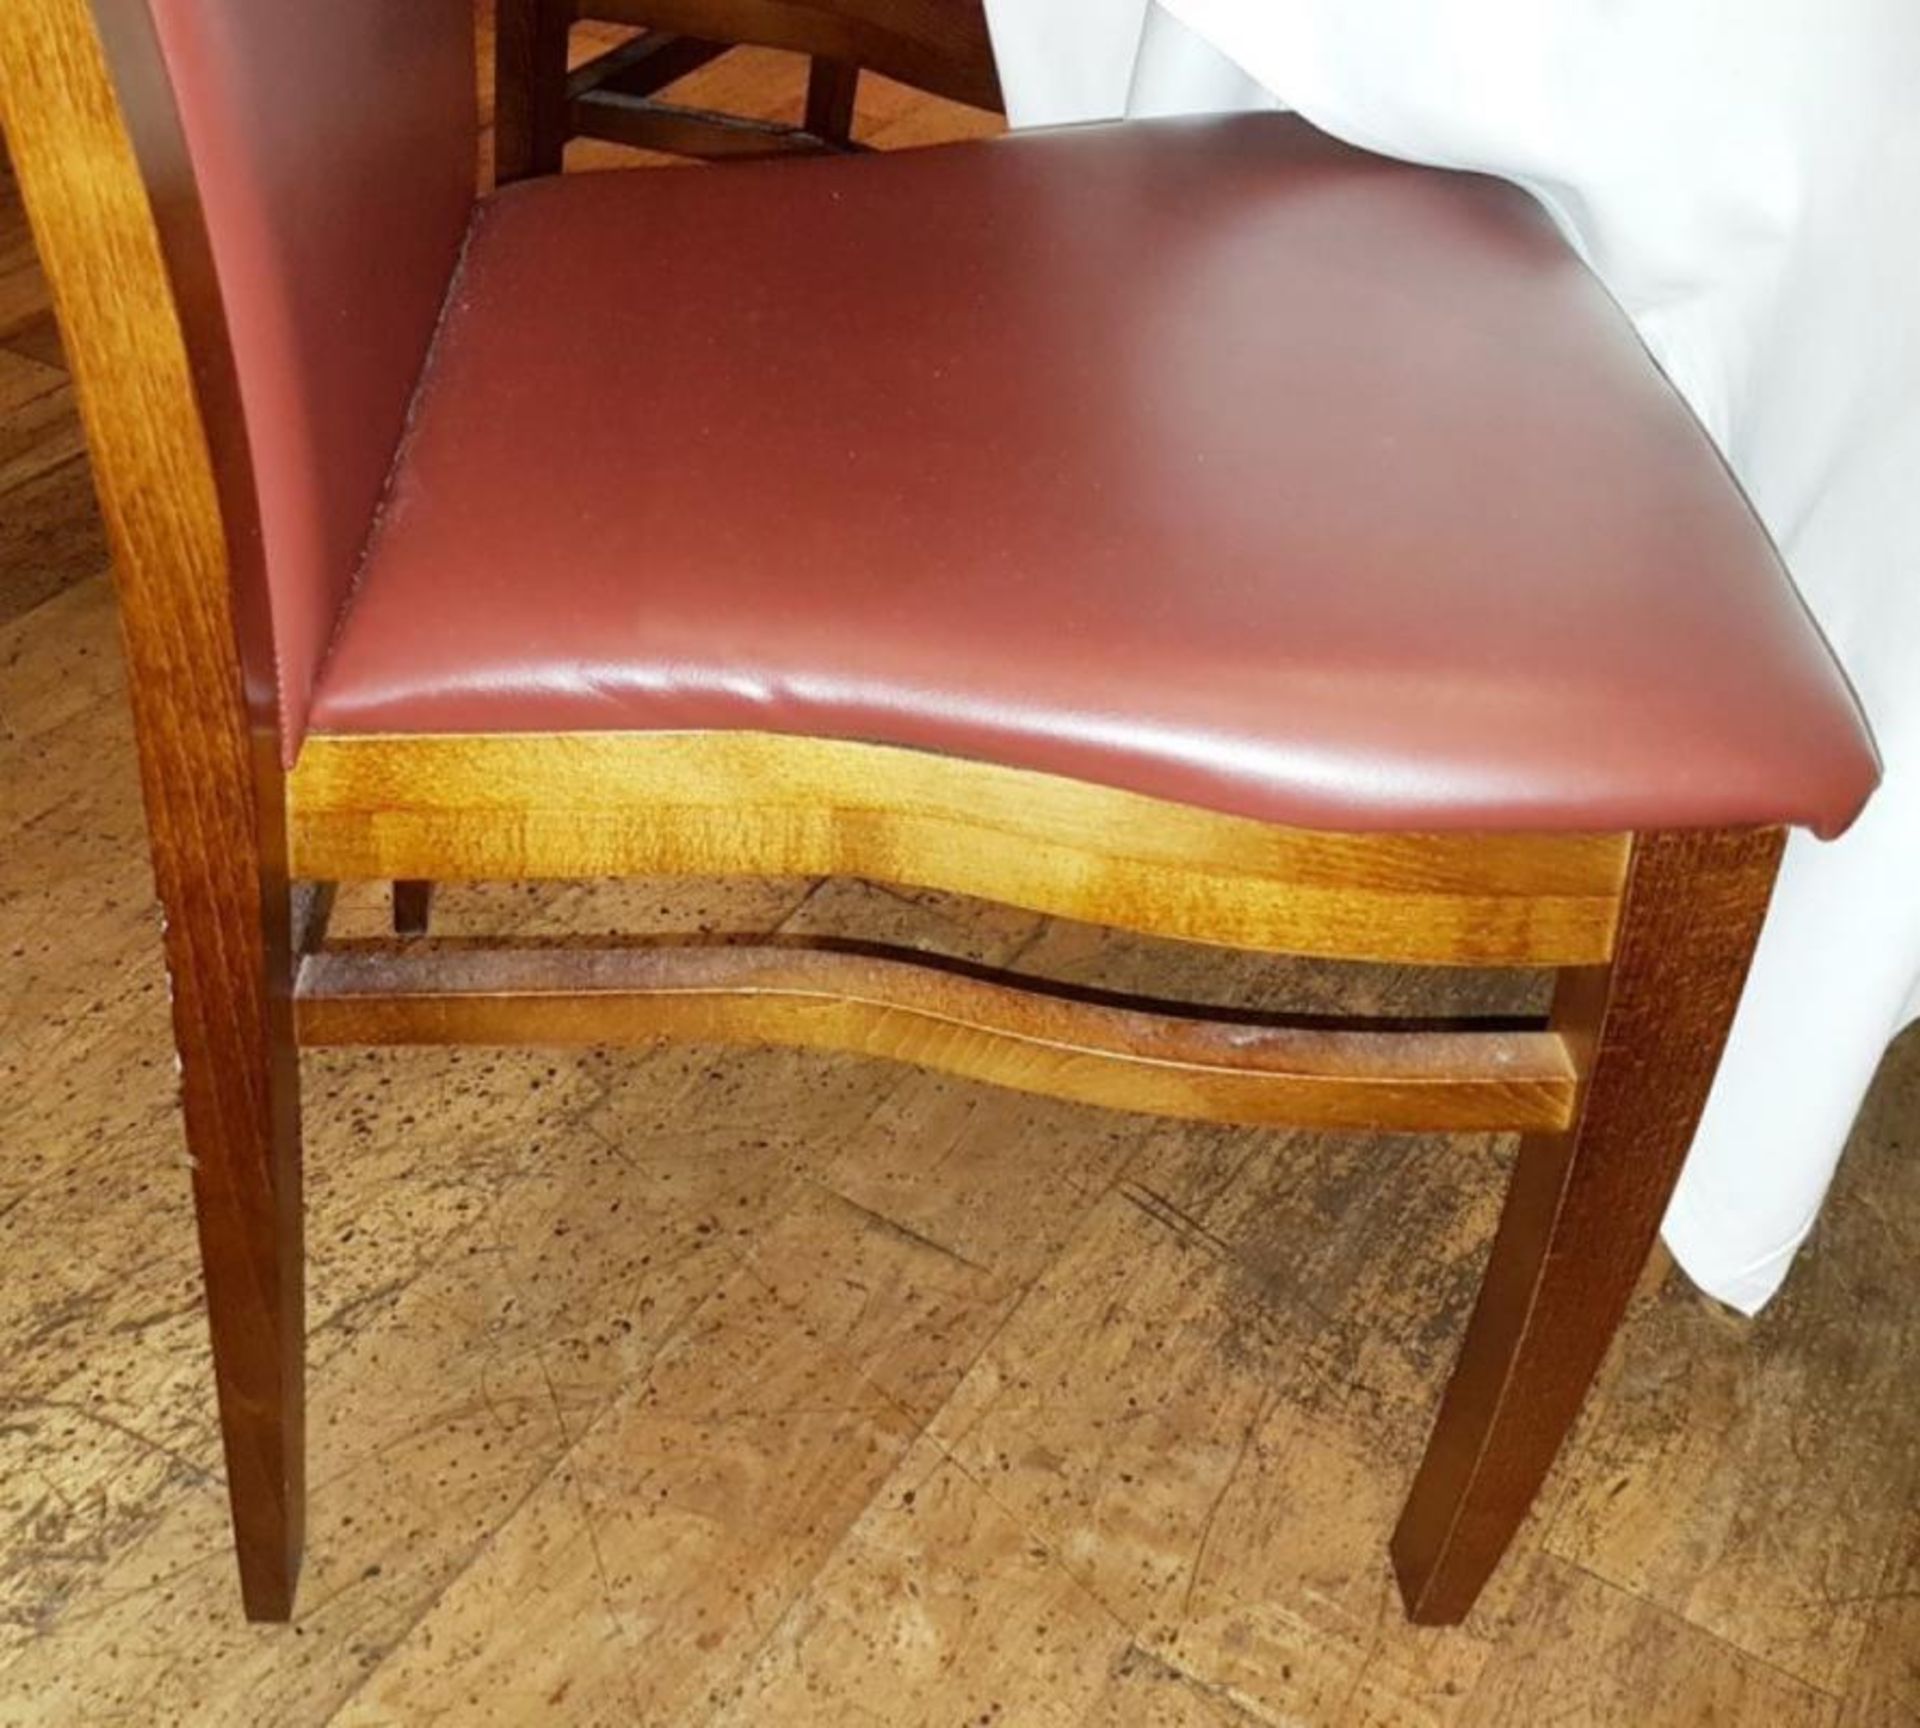 12 x Burgundy Faux Leather Dining Chairs With Wide Cushioned Seats - CL297 - Various Conditions - Re - Image 2 of 5